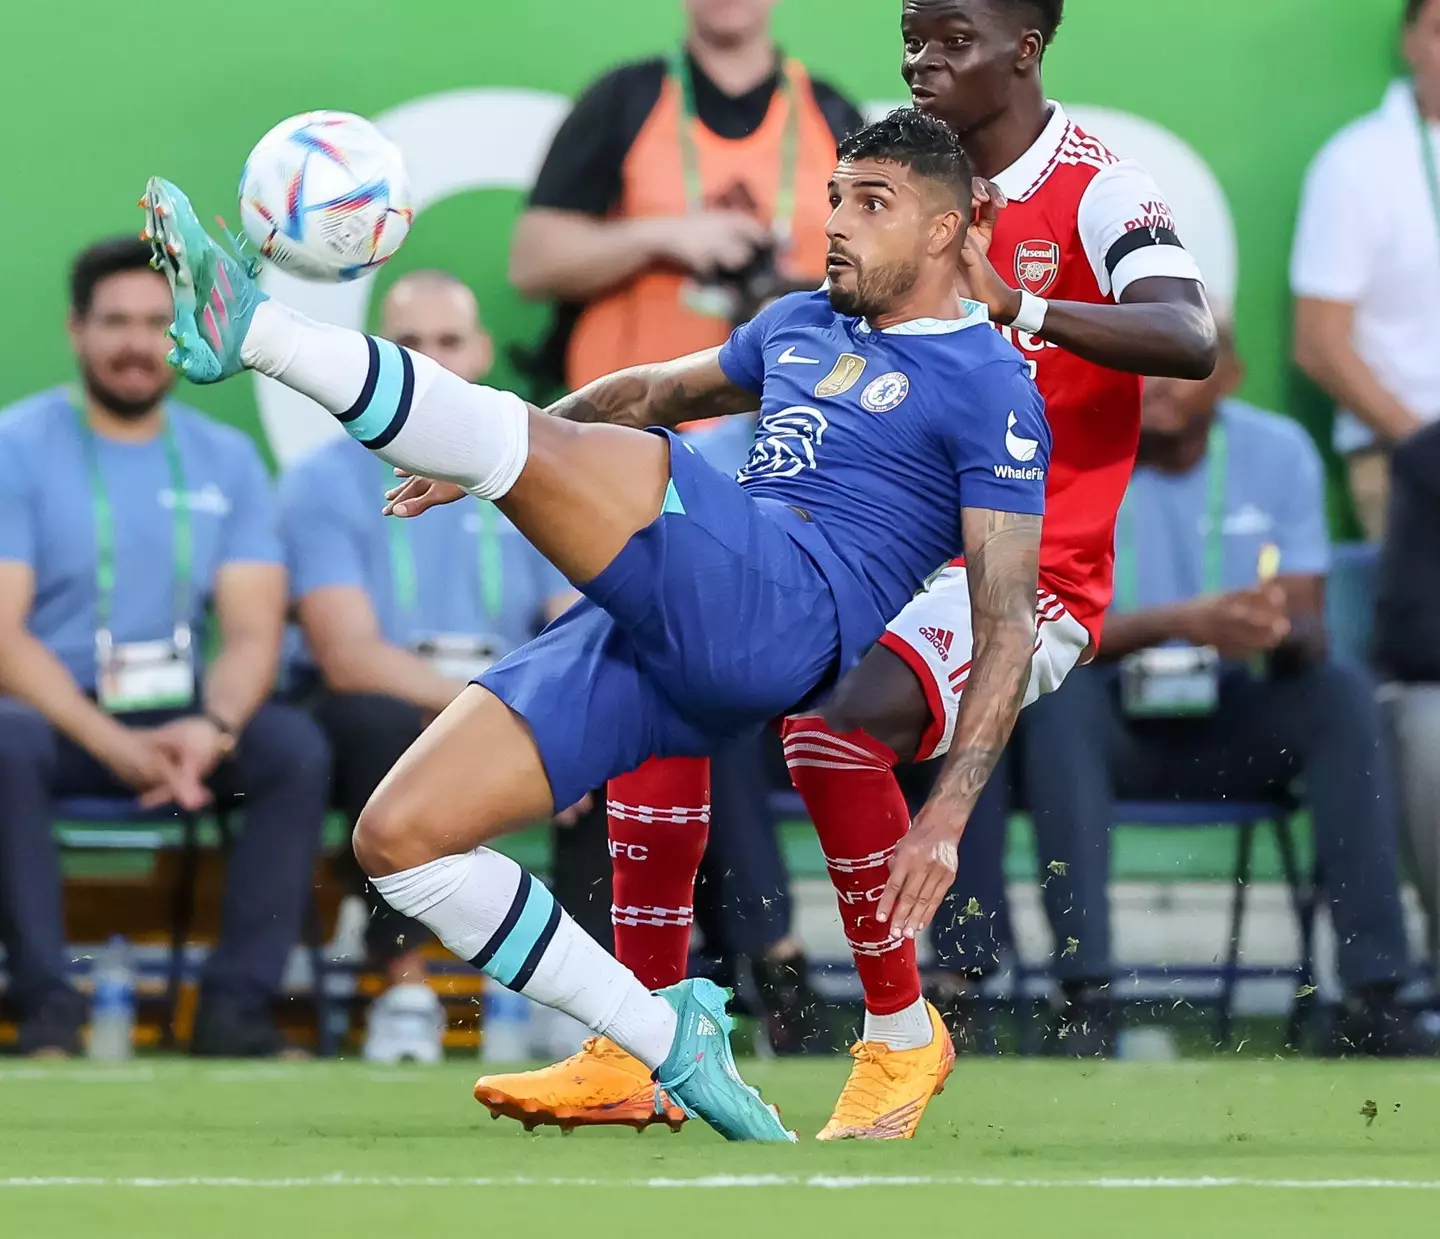 Chelsea defender Emerson Palmieri (33) defends the ball during the Florida Cup Series Arsenal vs Chelsea FC. (Alamy)